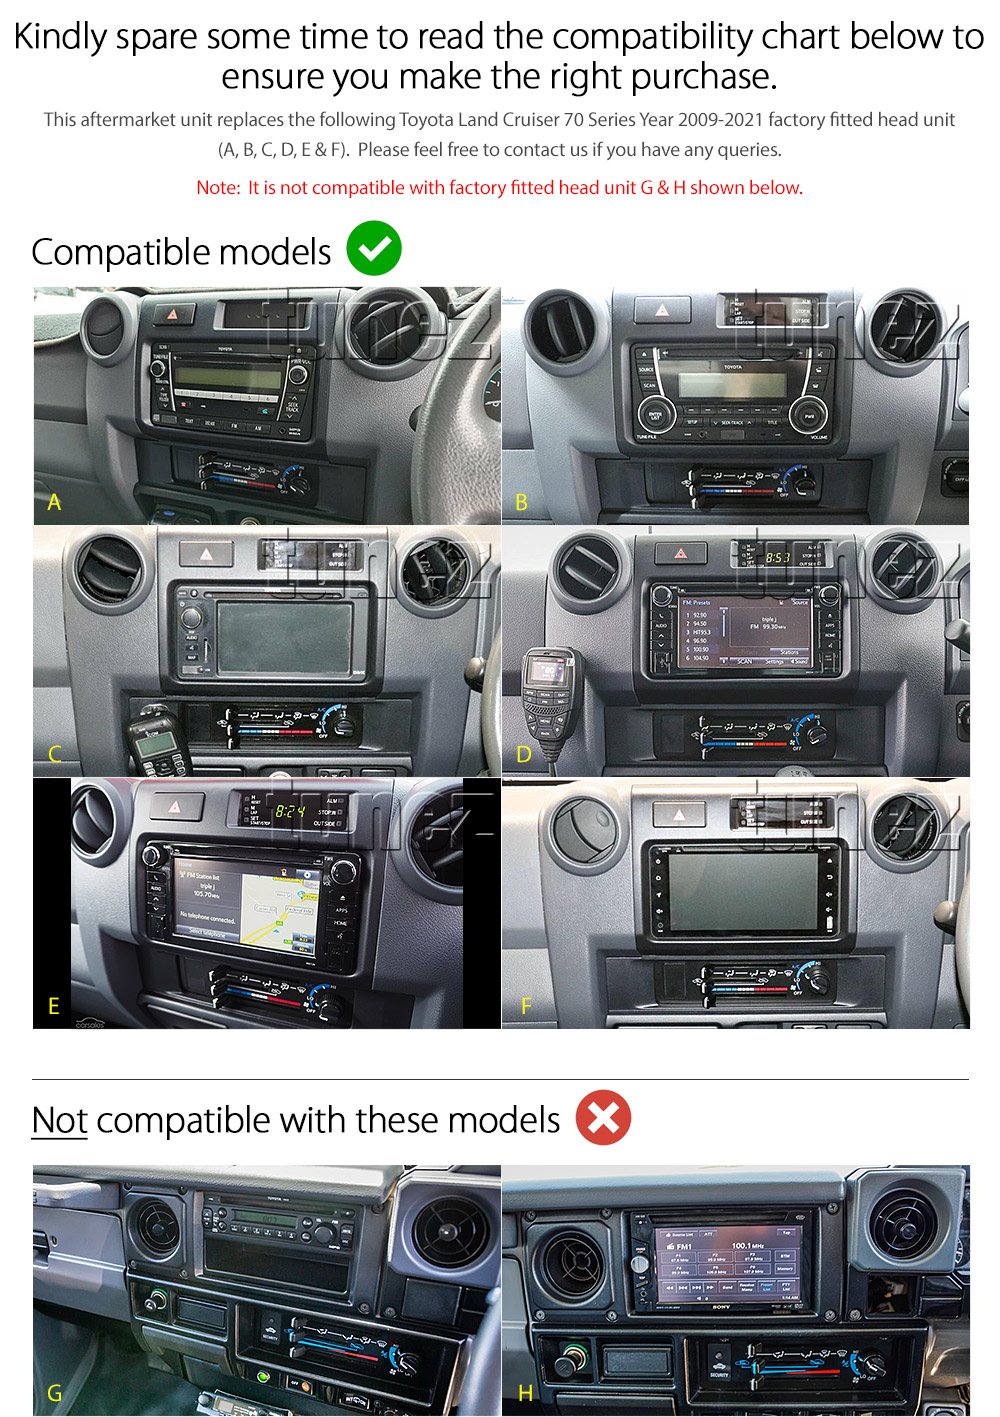 TLC12CP TLC12 Licensed Apple CarPlay Android Auto GPS GPS Super Large 9-inch Toyota Land Cruiser LandCruiser 70 Series VDJ Year 2009 2010 2011 2012 2013 2014 2015 2016 2017 2018 2019 2020 2021 2022 VDJ76R VDJ78R VDJ79R J70 J76 J78 J79 GX GXL Workmate Troopcarrier Super Large 9-inch Touch Screen IPS Capacitive Universal Double DIN Latest Australia UK European USA Original Car USB 2.0A Charge player radio stereo head unit Aftermarket External and Internal Microphone Bluetooth Europe Sat Nav Navi Plug and Play ISO Plug Wiring Harness Matching Fascia Kit Facia Free Reversing Camera Album Art ID3 Tag RMVB MP3 MP4 AVI MKV Full High Definition FHD AirPlay Air Play MirrorLink Mirror Link Connects2 CTSTY008.2 CTSTY00C CTSTY00CAMP CTSTY013.2